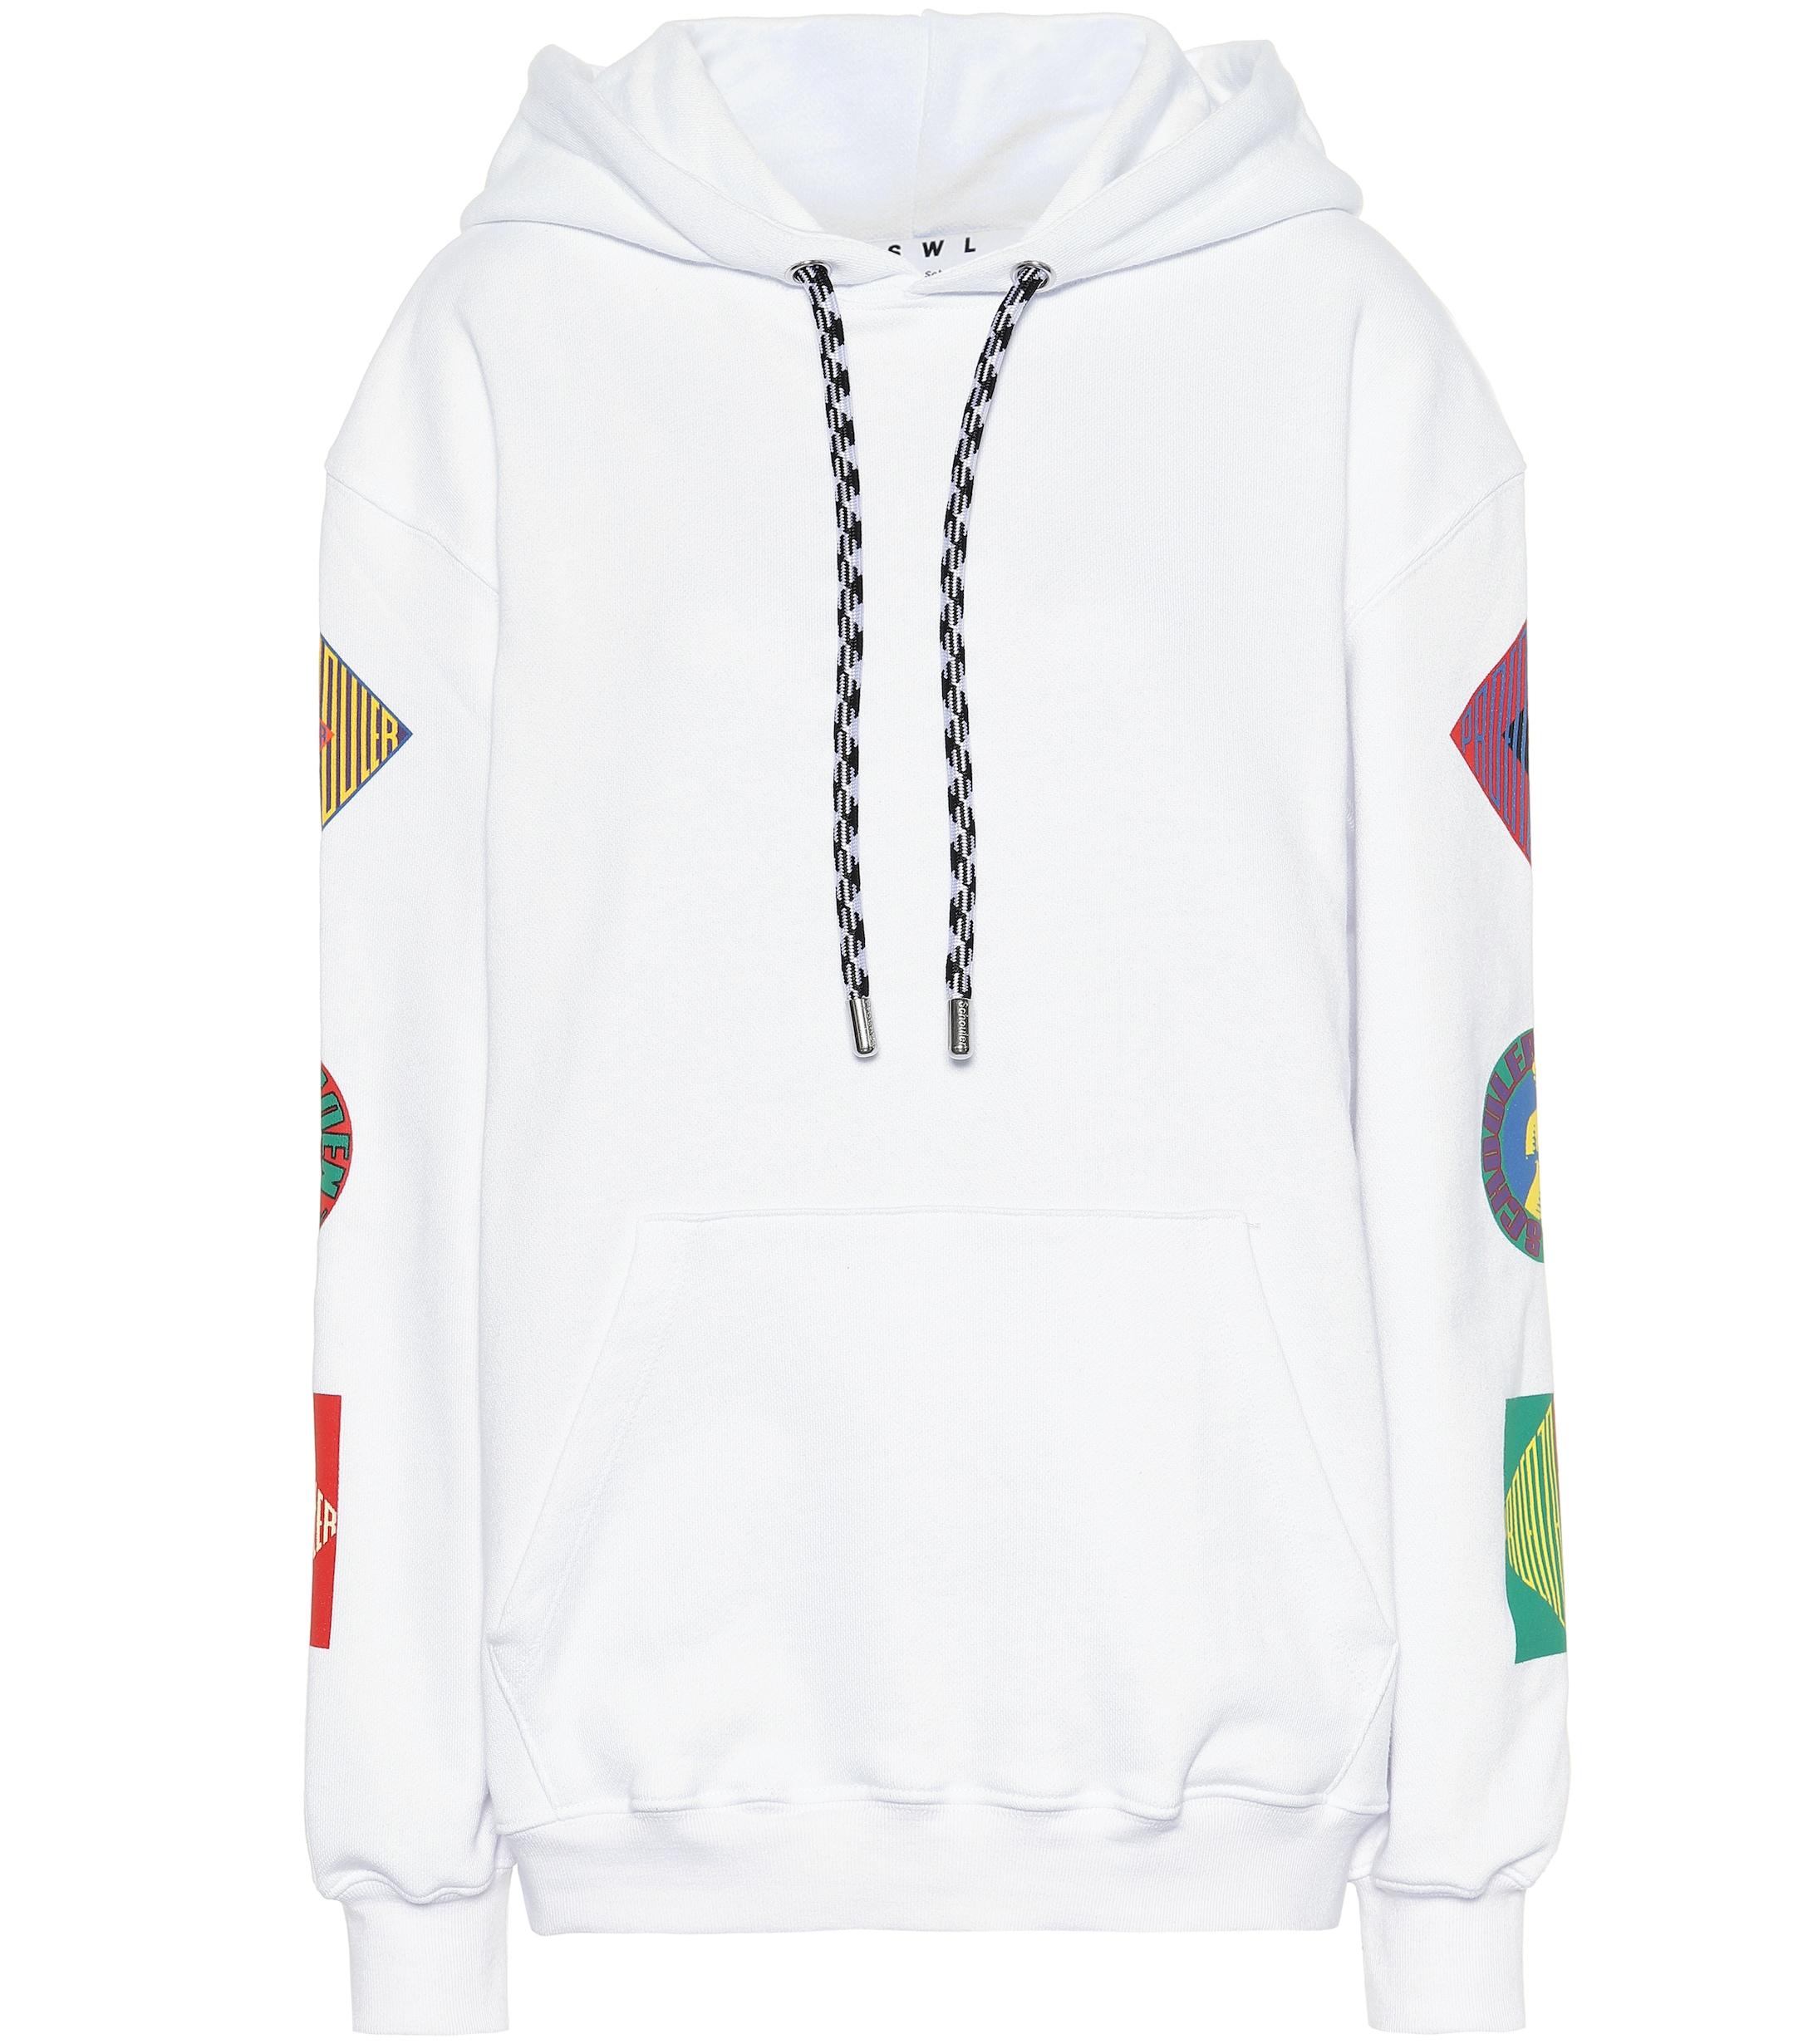 PROENZA SCHOULER WHITE LABEL Printed Cotton Hoodie in White - Lyst